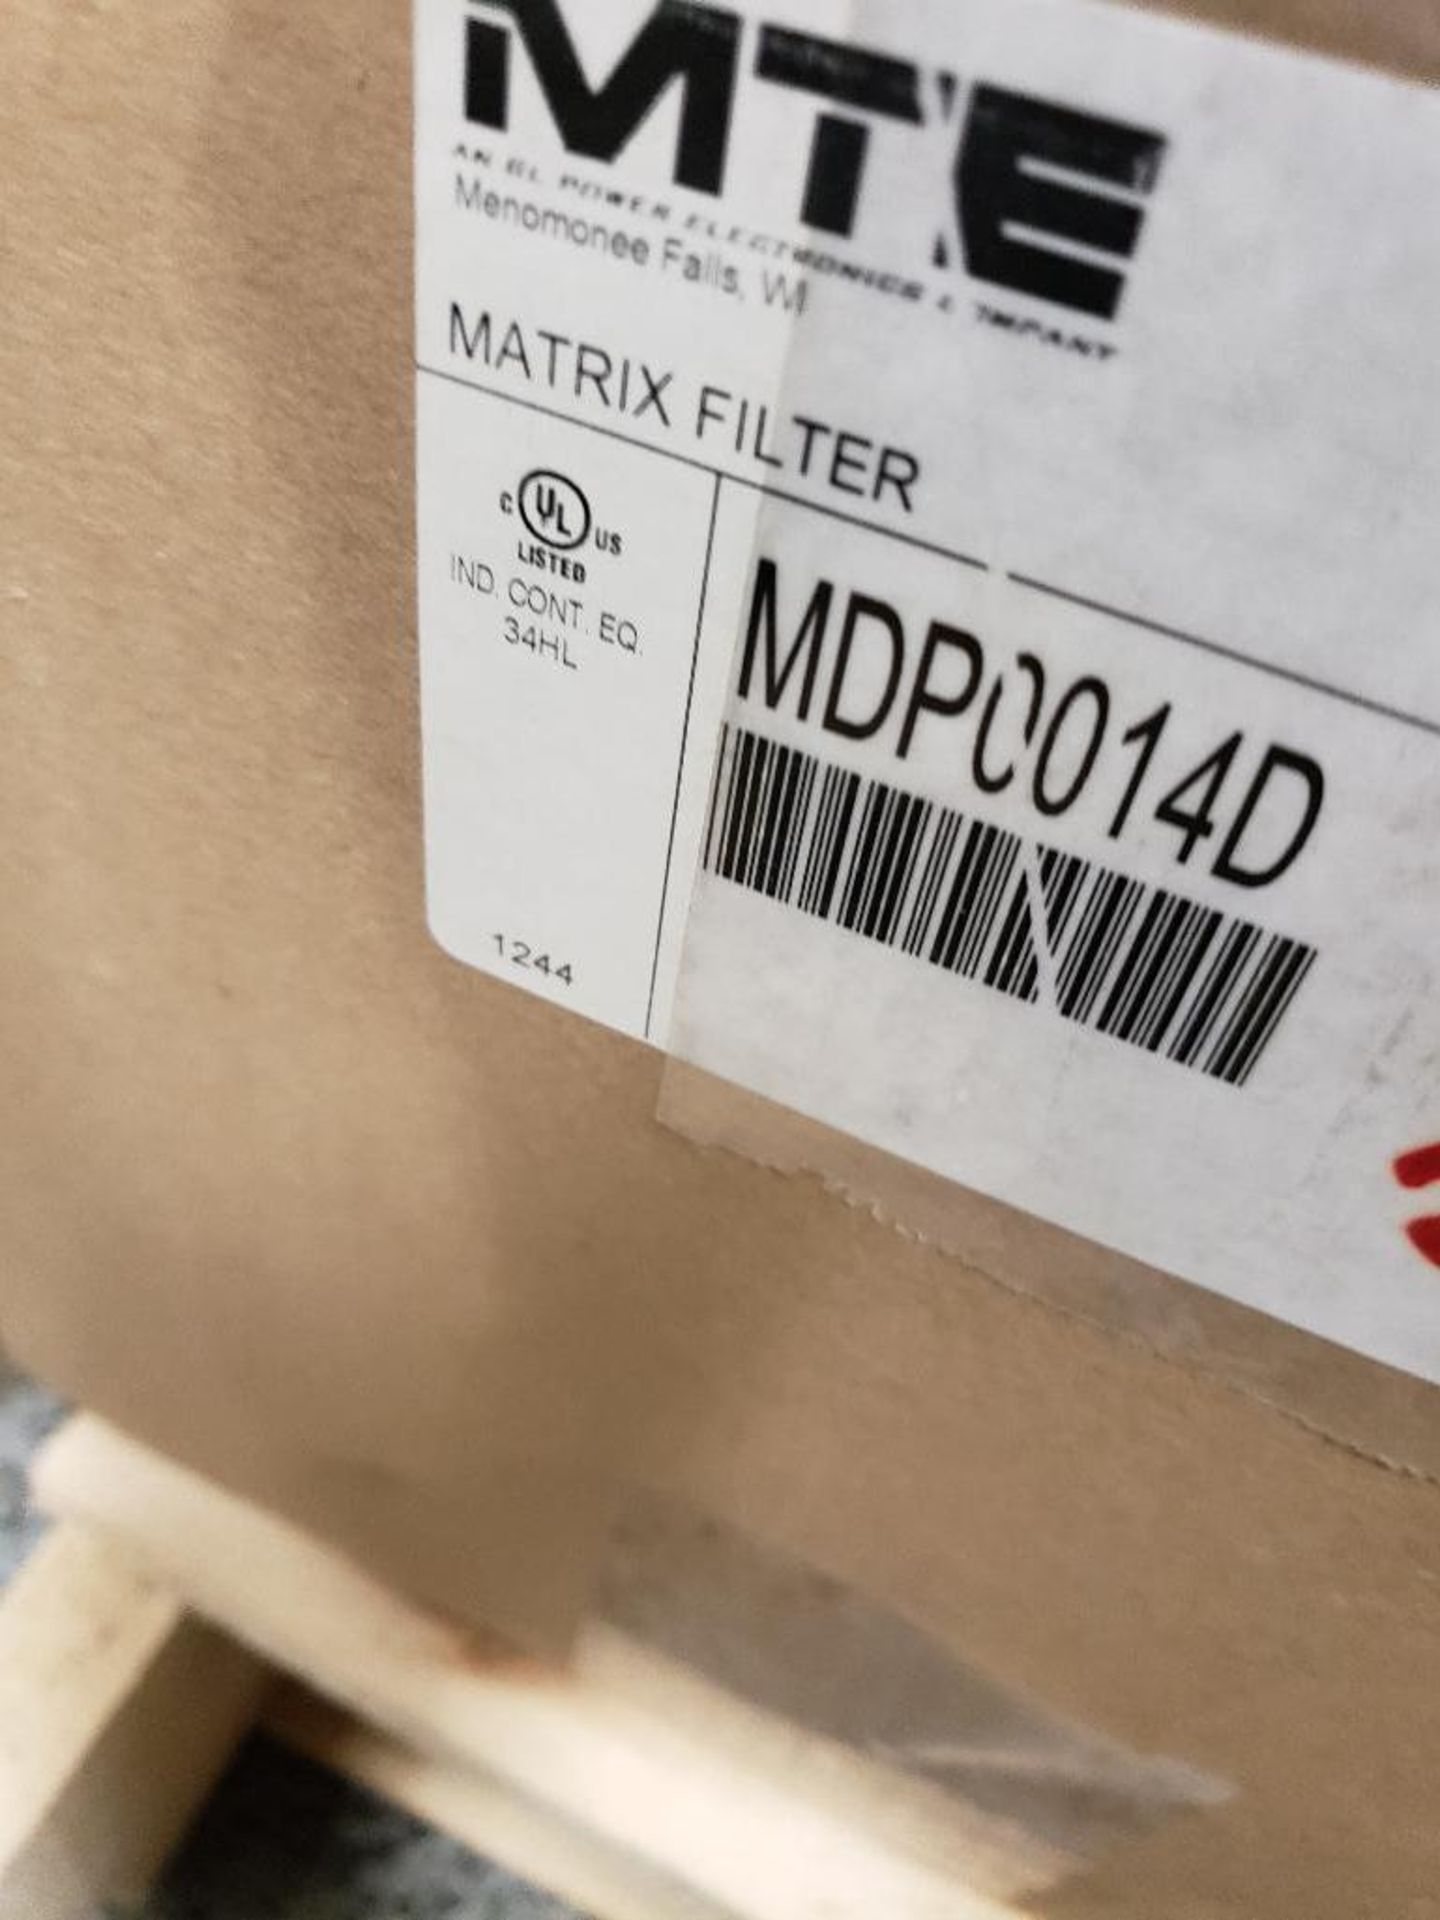 Qty 3 - MTE matrix filter model MDP0014D. New in boxes. - Image 8 of 8